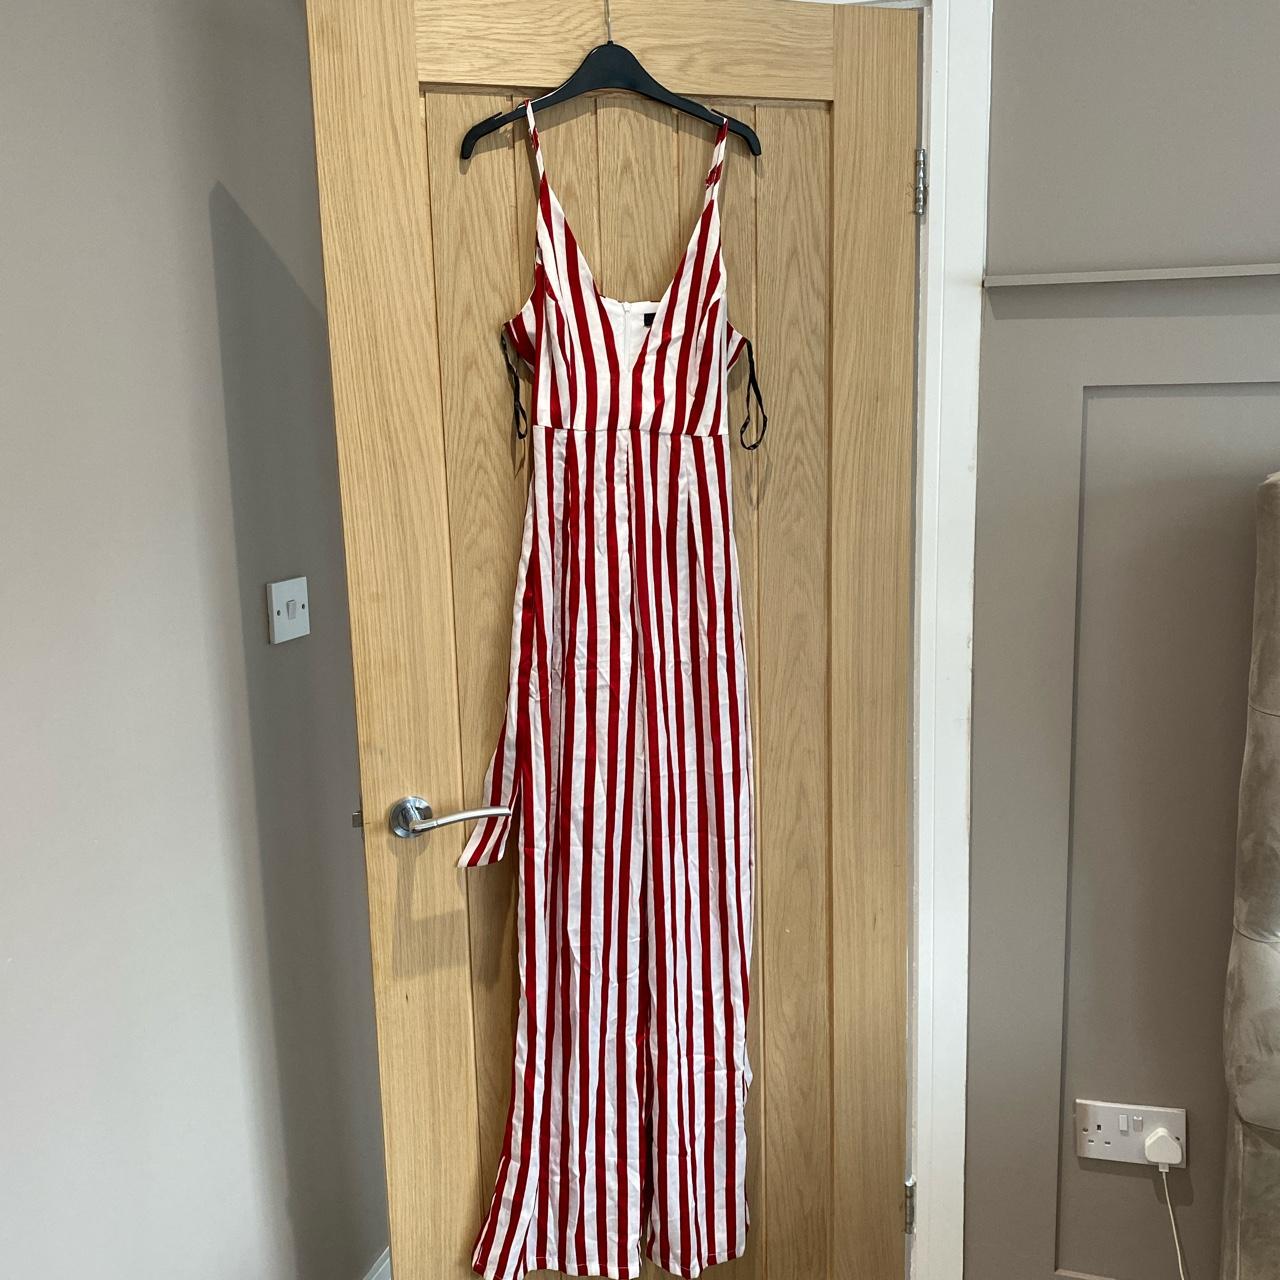 Missguided red stripe jumpsuit Size 8 - Worn once... - Depop